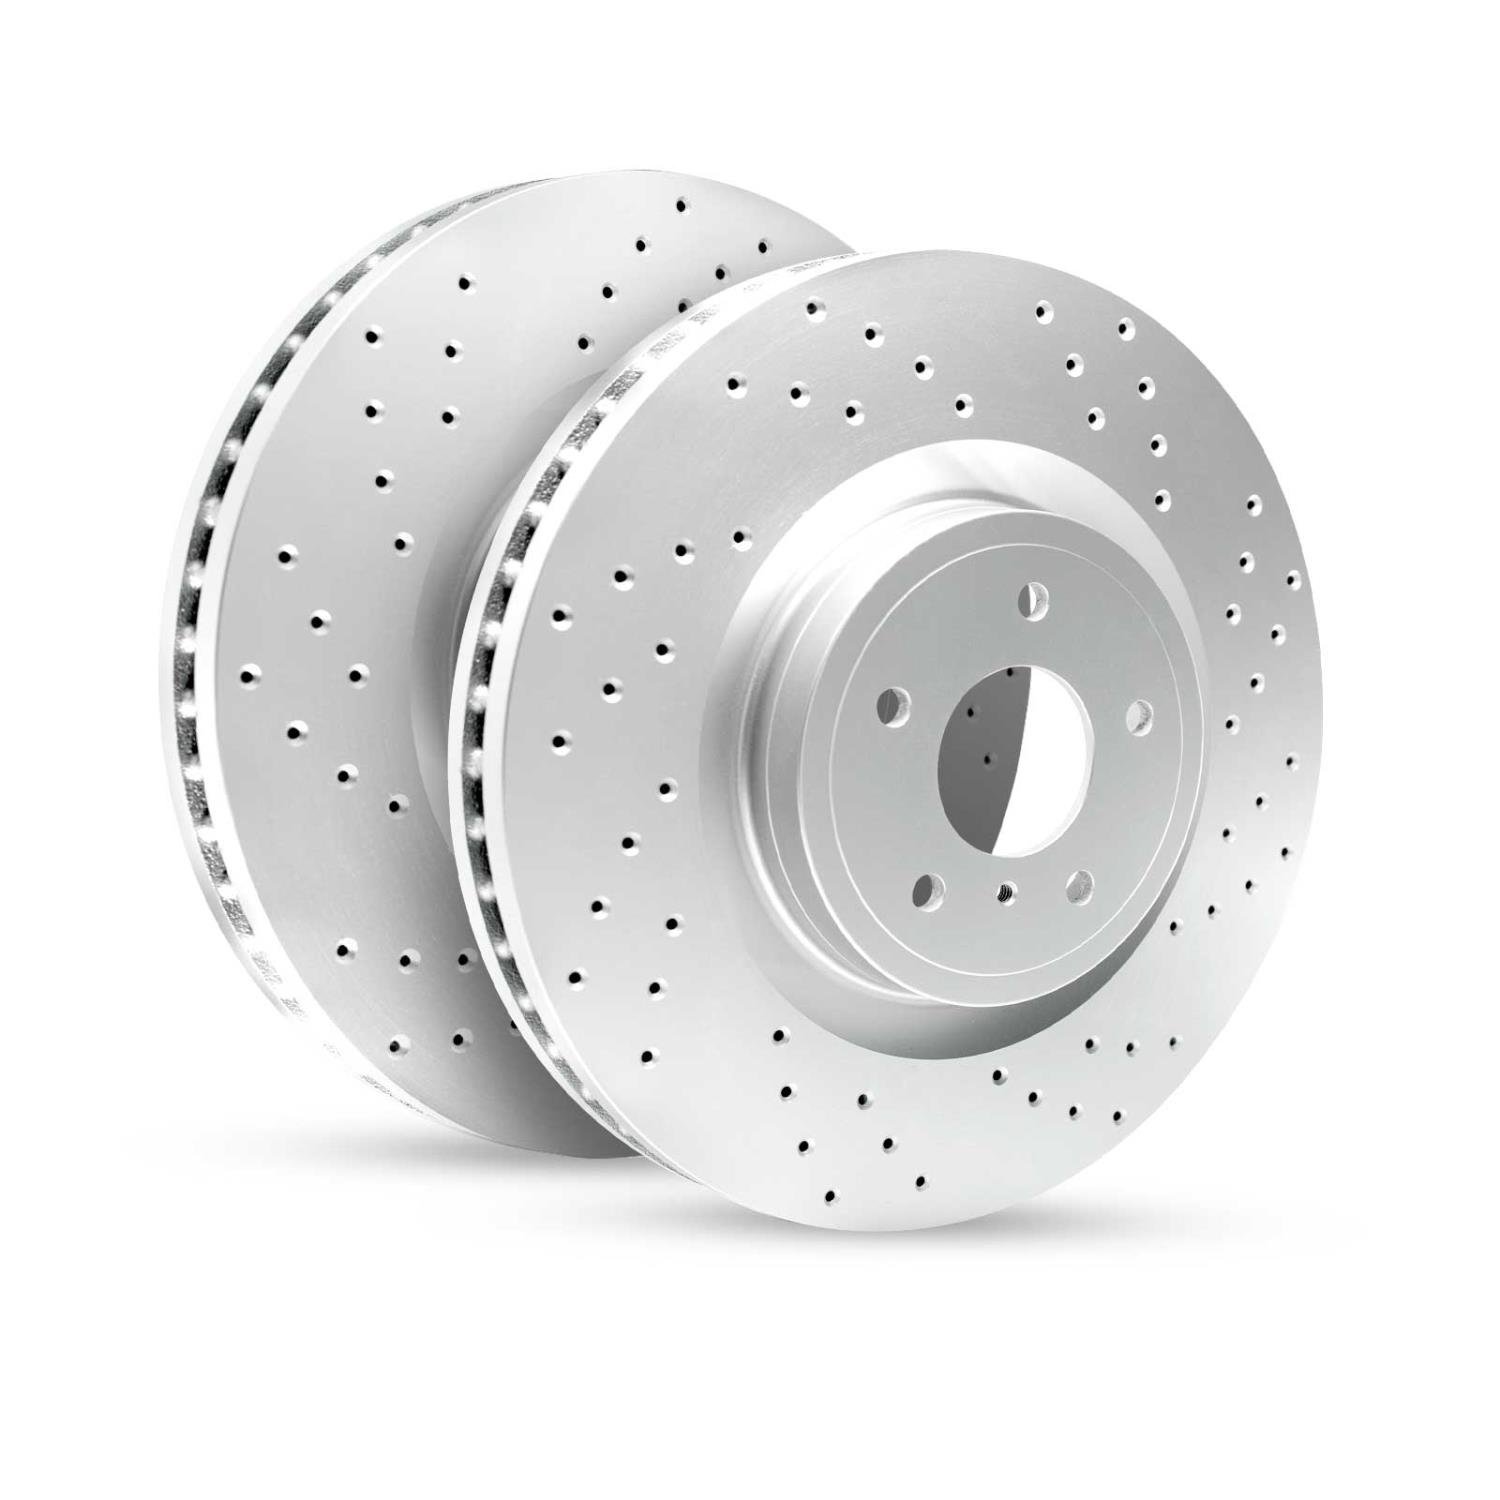 GEO-Carbon Drilled/Slotted Rotors, 2017-2019 Fits Multiple Makes/Models, Position: Front